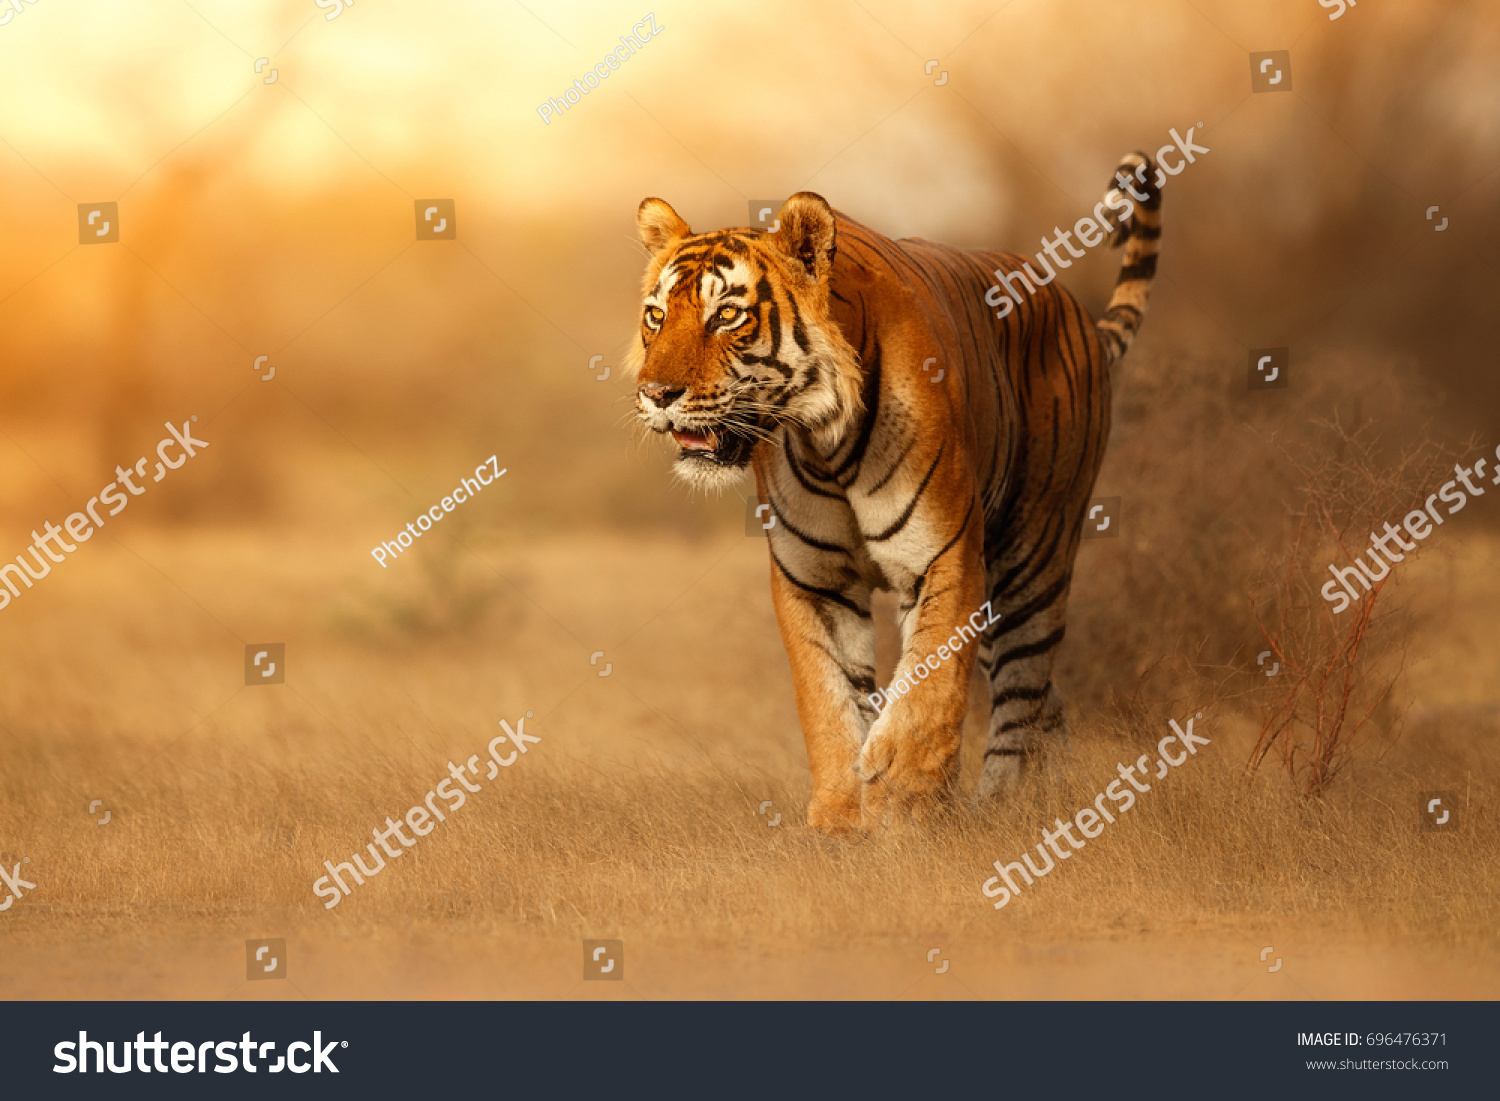 Great tiger male in the nature habitat. Tiger walk during the golden light time. Wildlife scene with danger animal. Hot summer in India. Dry area with beautiful indian tiger, Panthera tigris #696476371